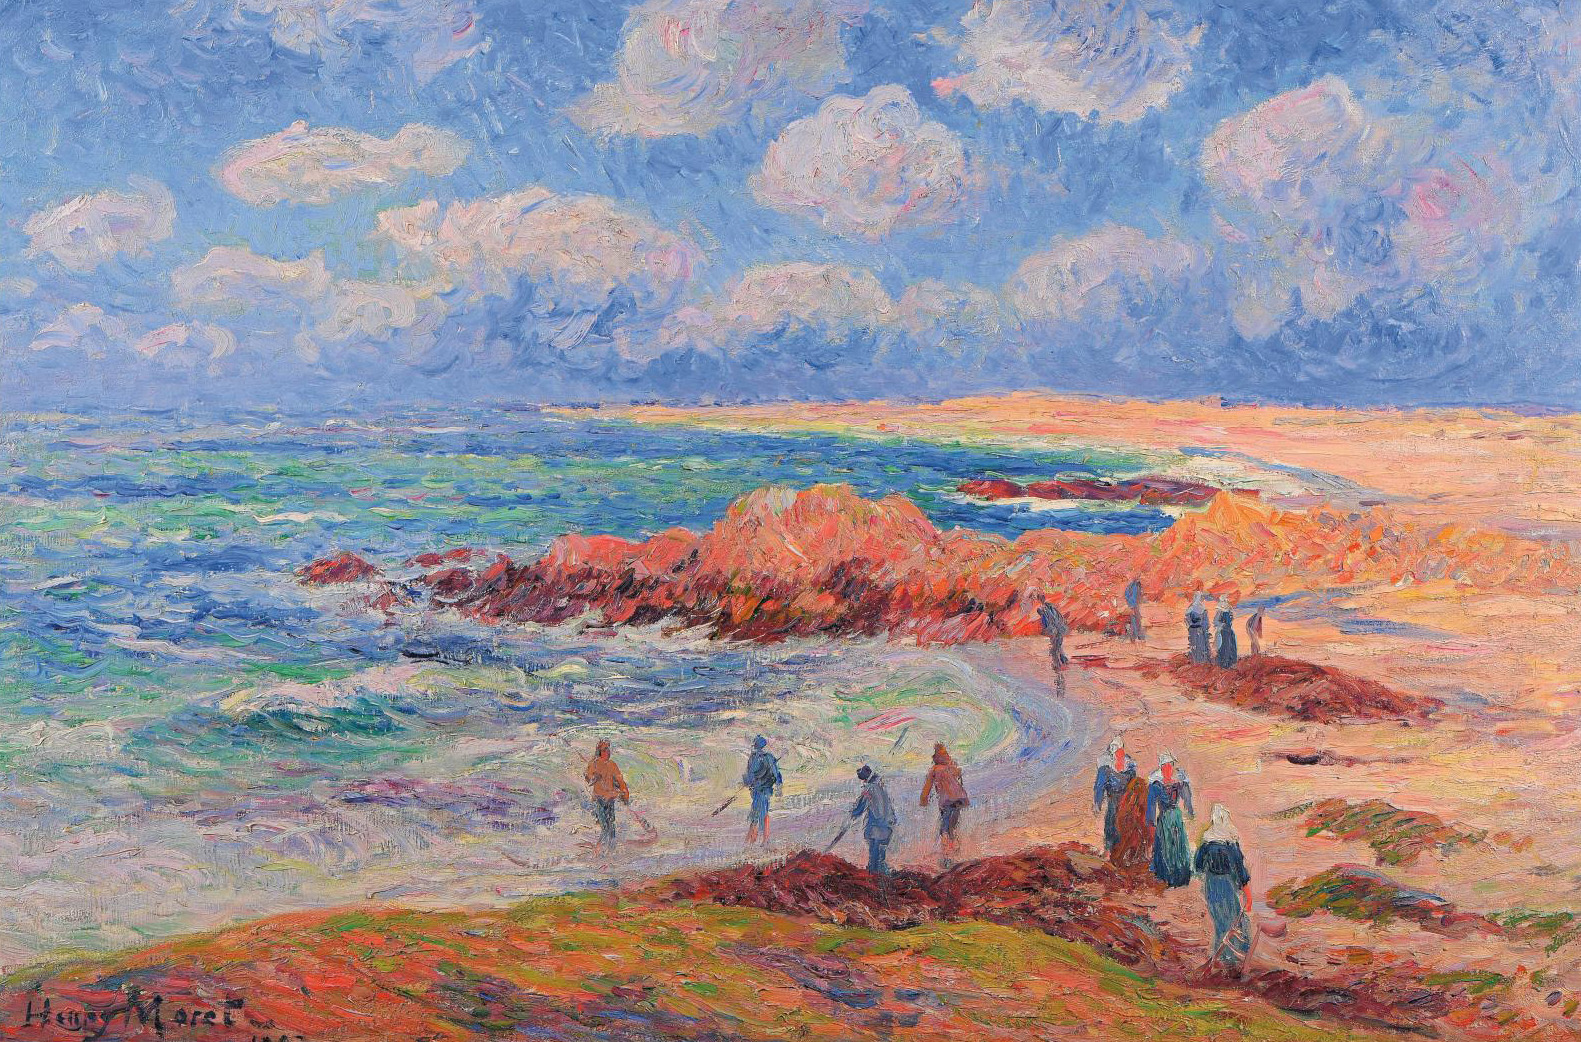 Henry Moret, from Normandy to Brittany